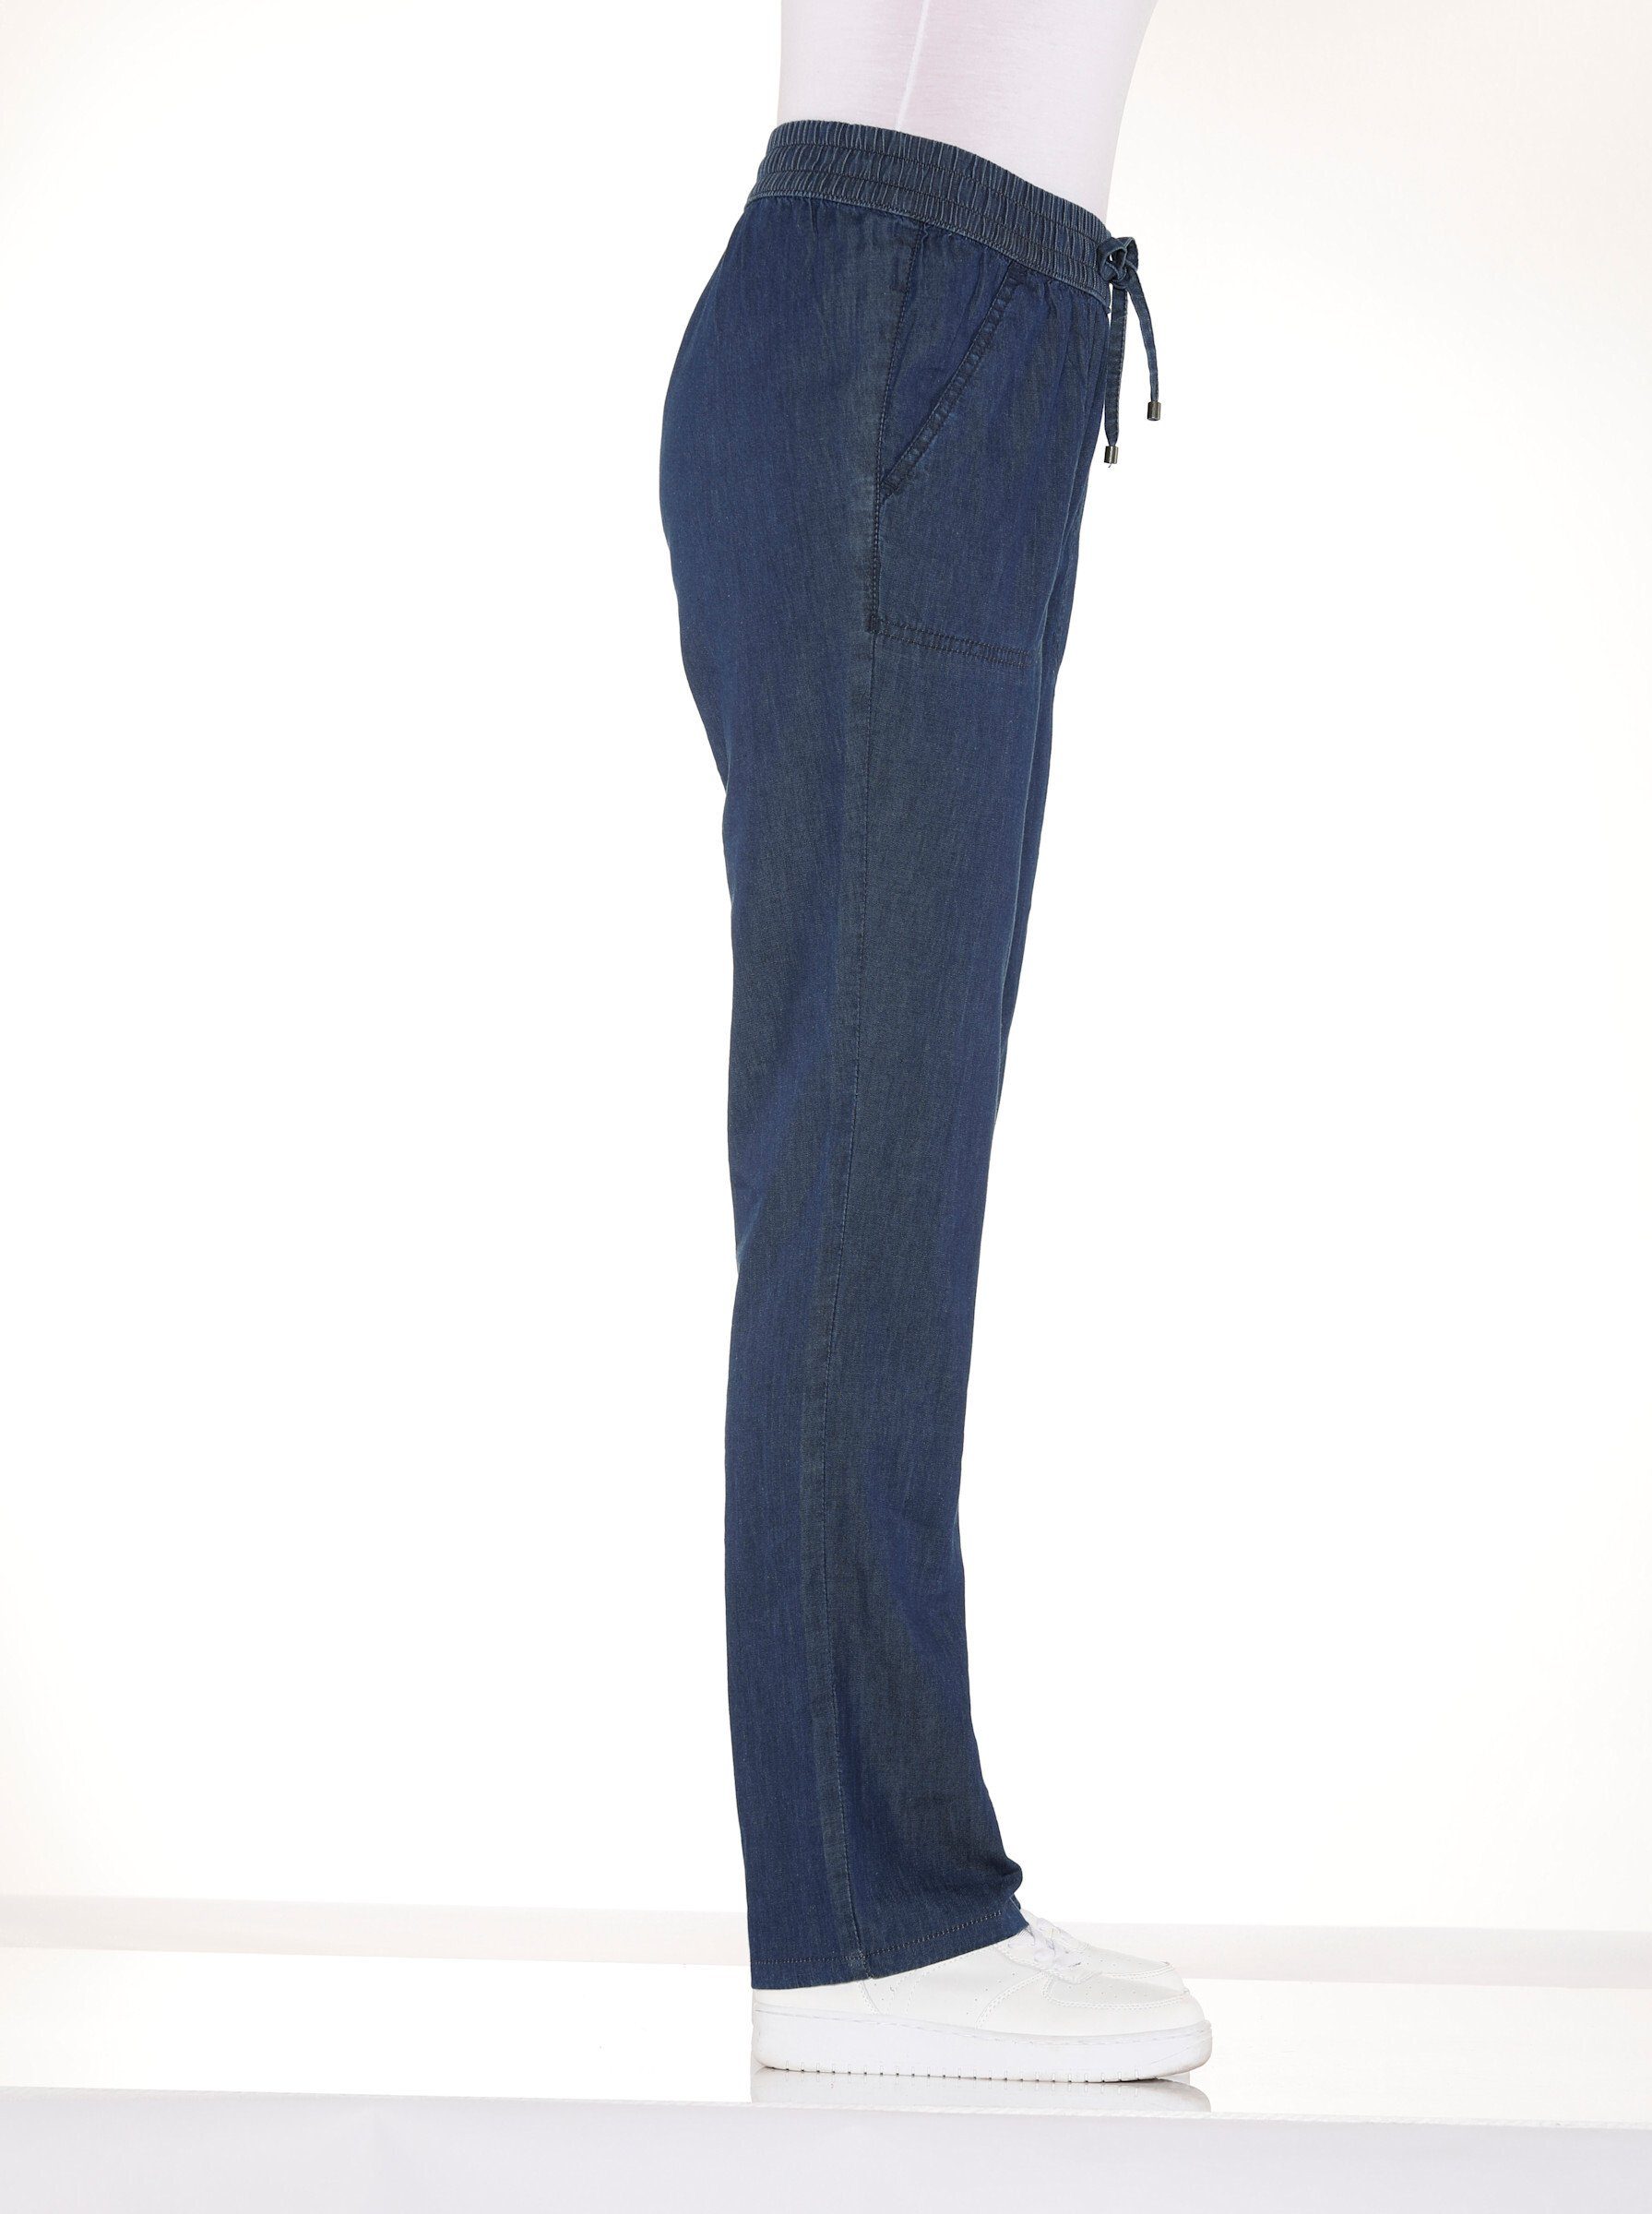 blue-stone-washed an! Jeans Sieh Bequeme